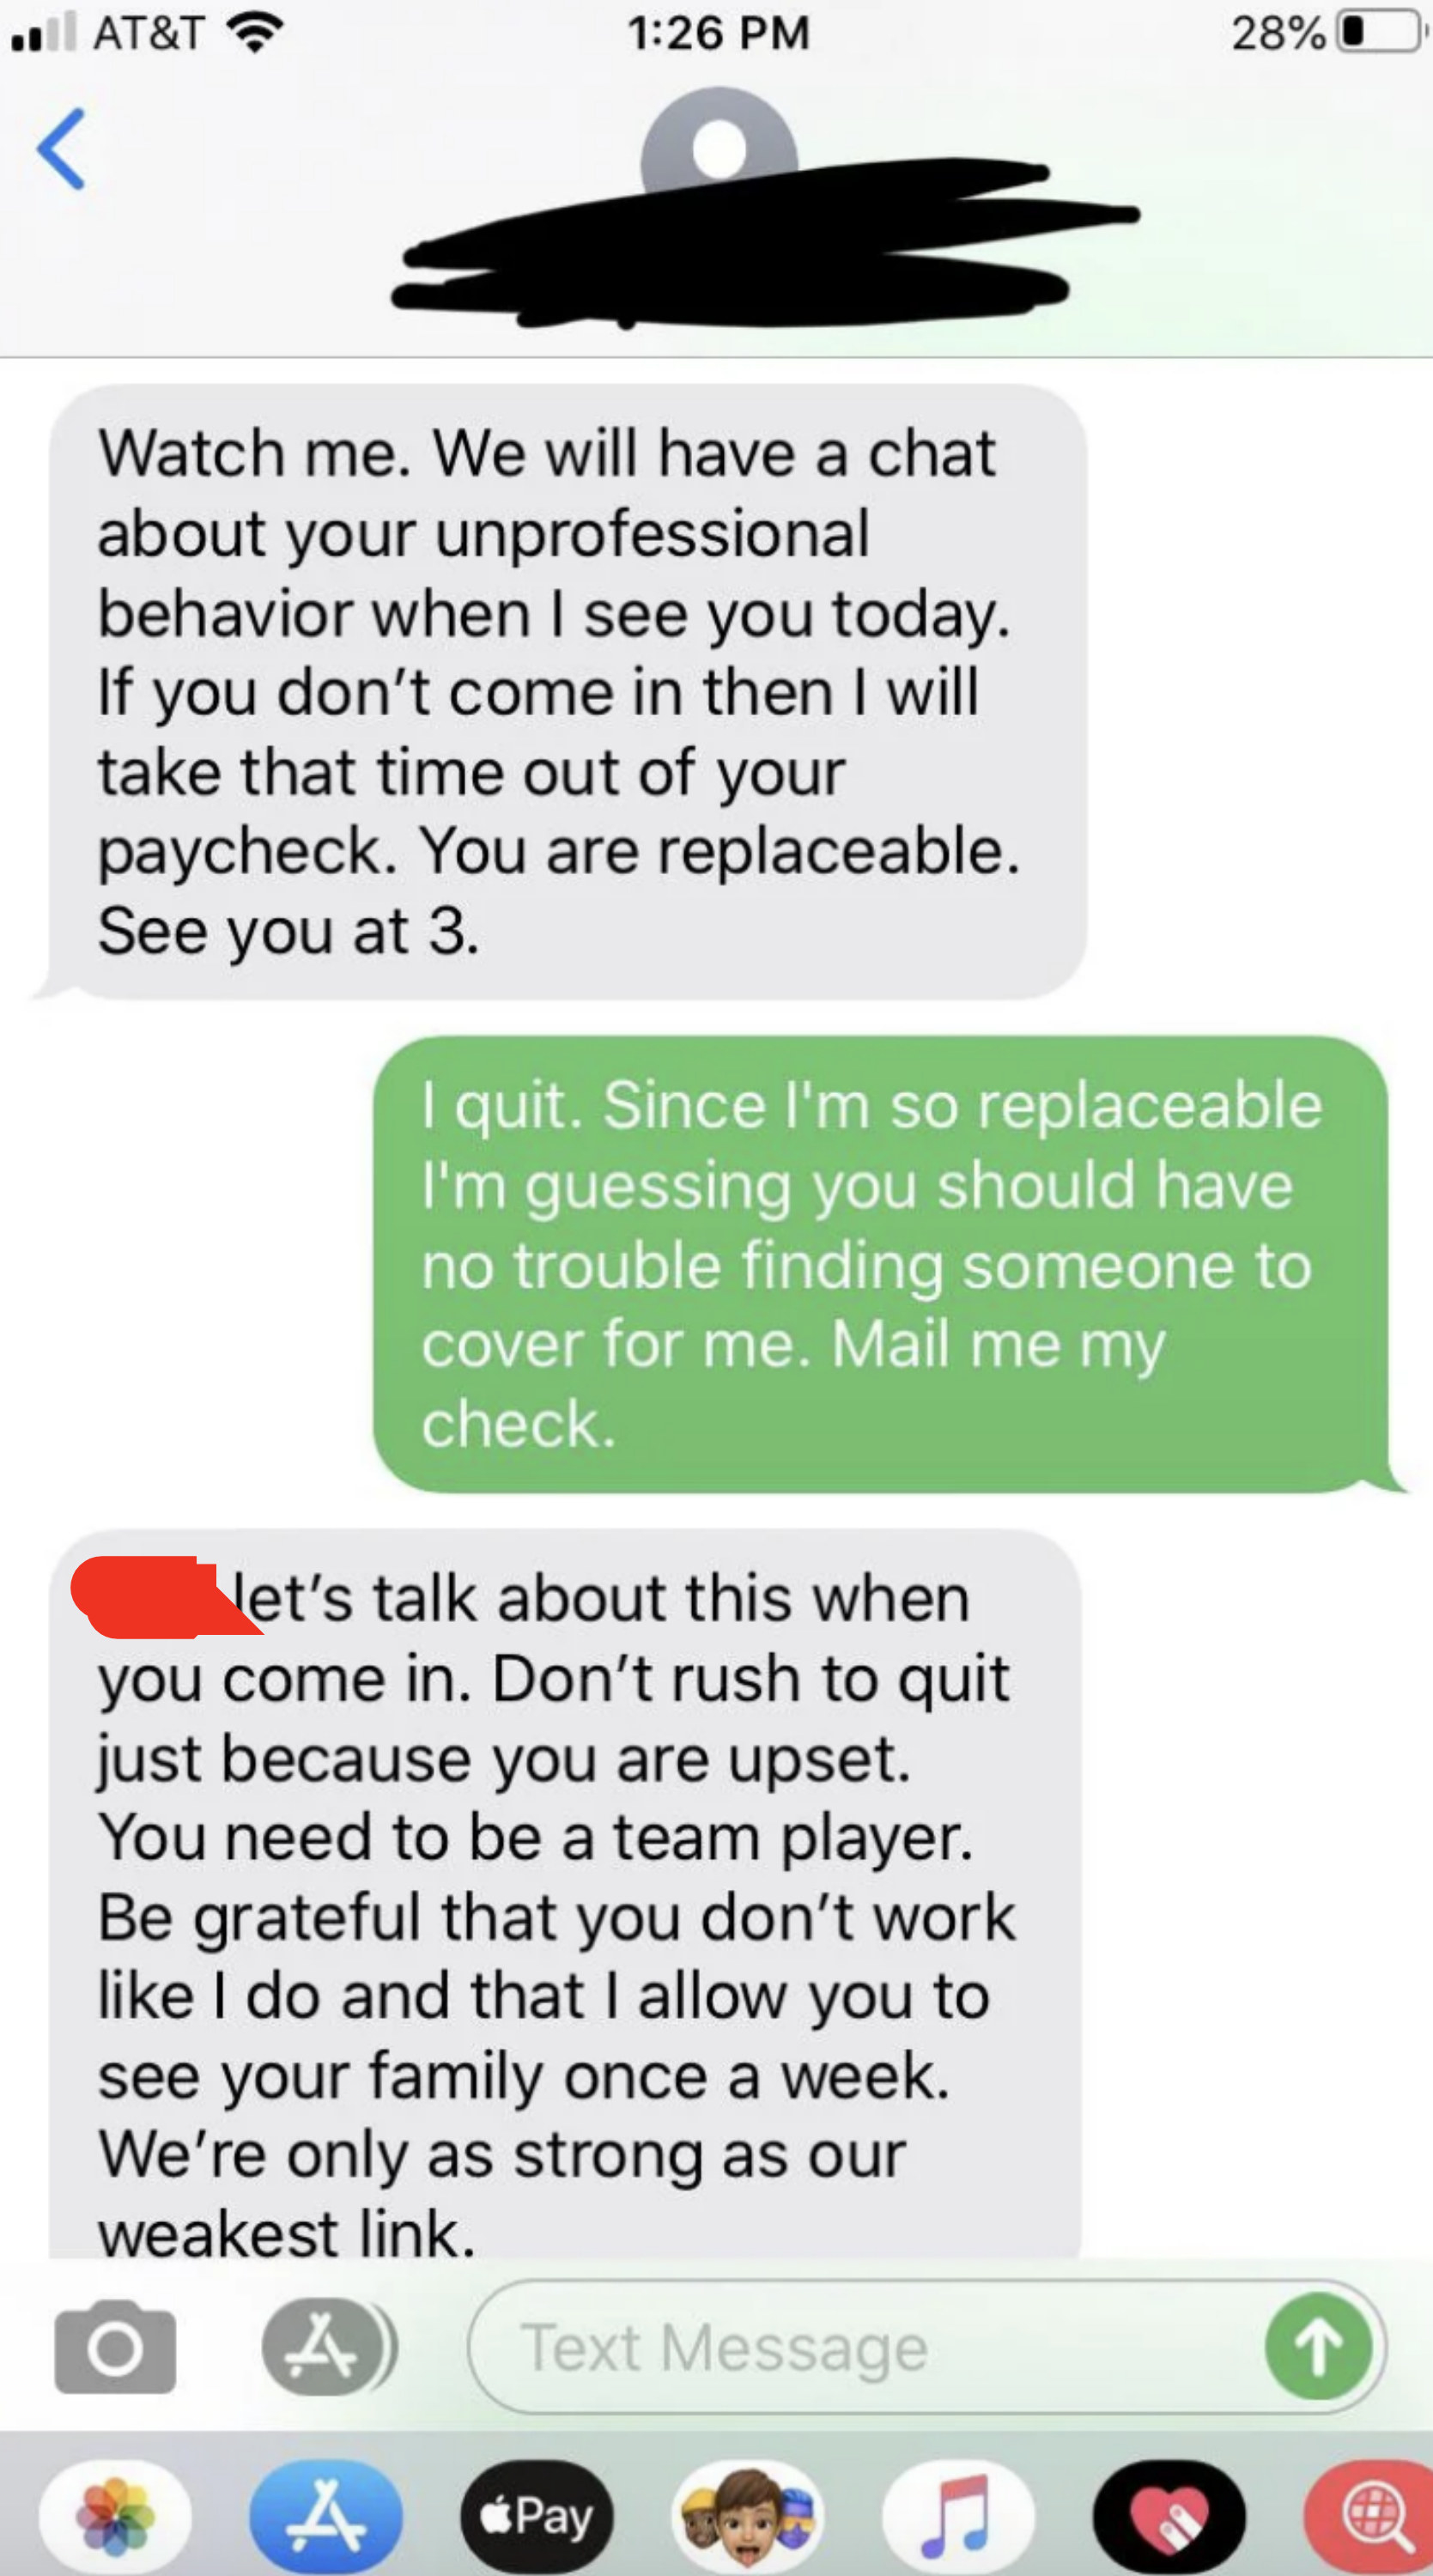 Boss threatening employee when they requested time off